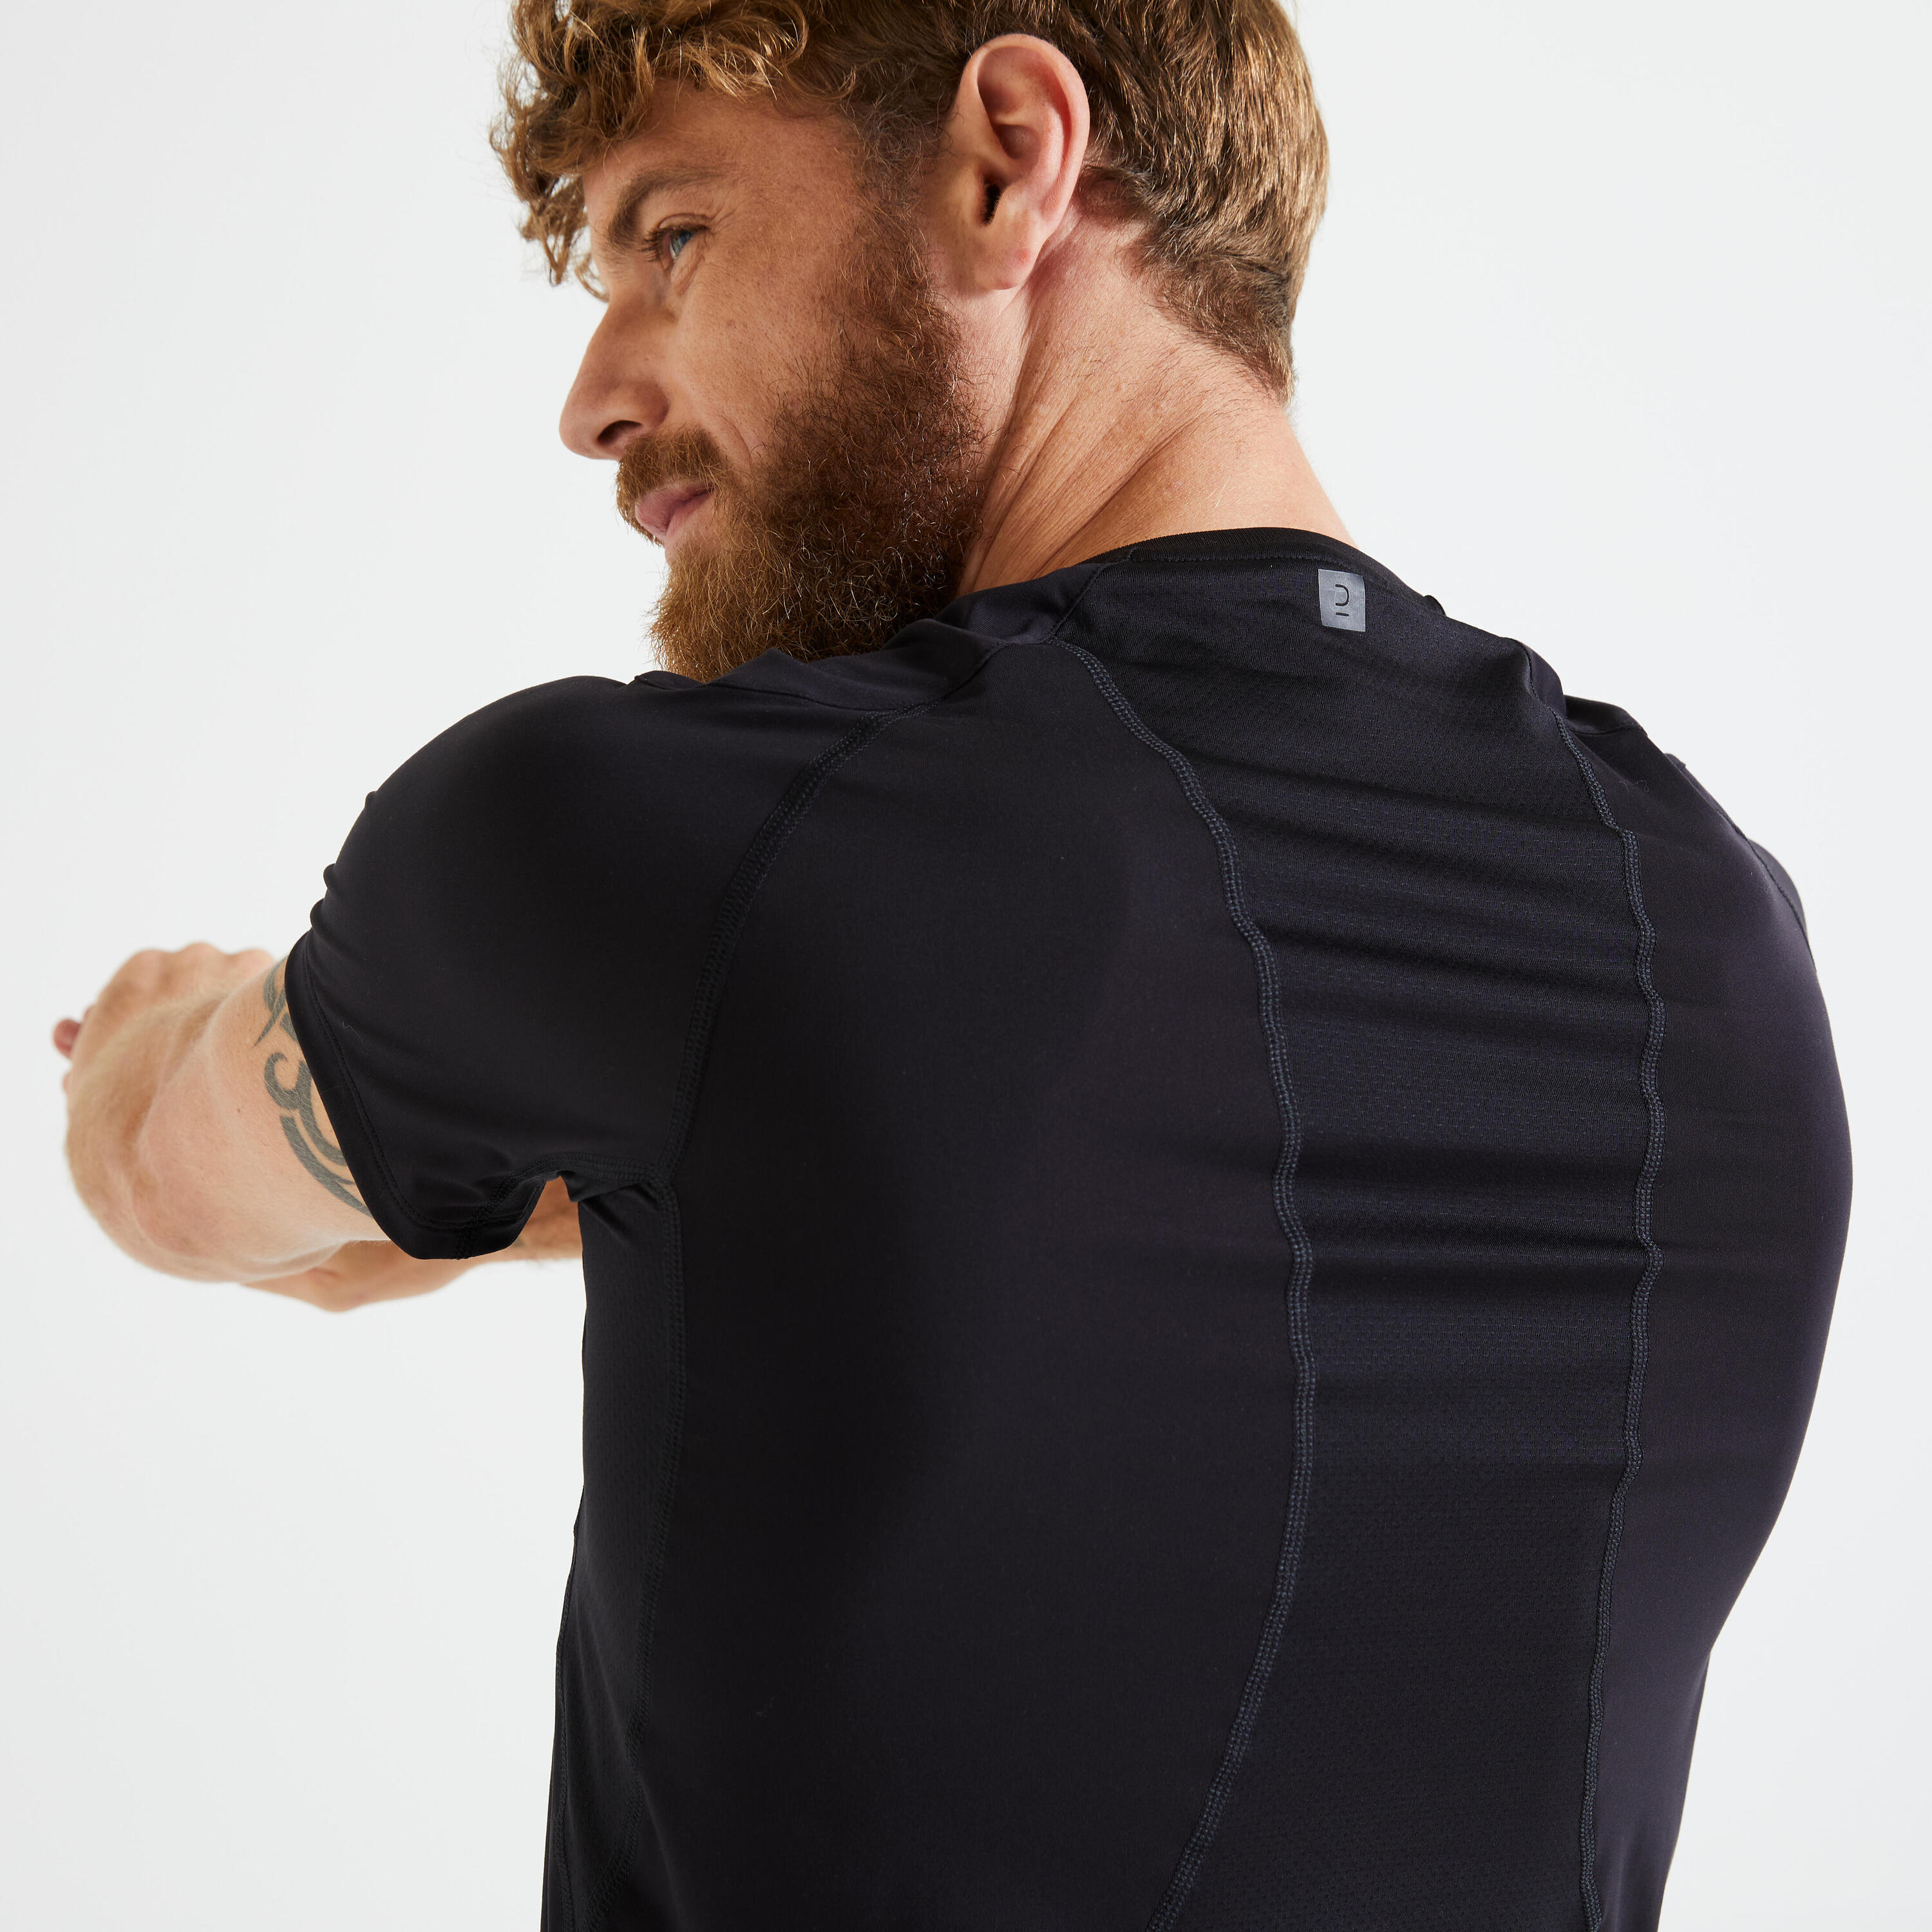 Technical Fitness T-Shirt - Solid Black 4/6